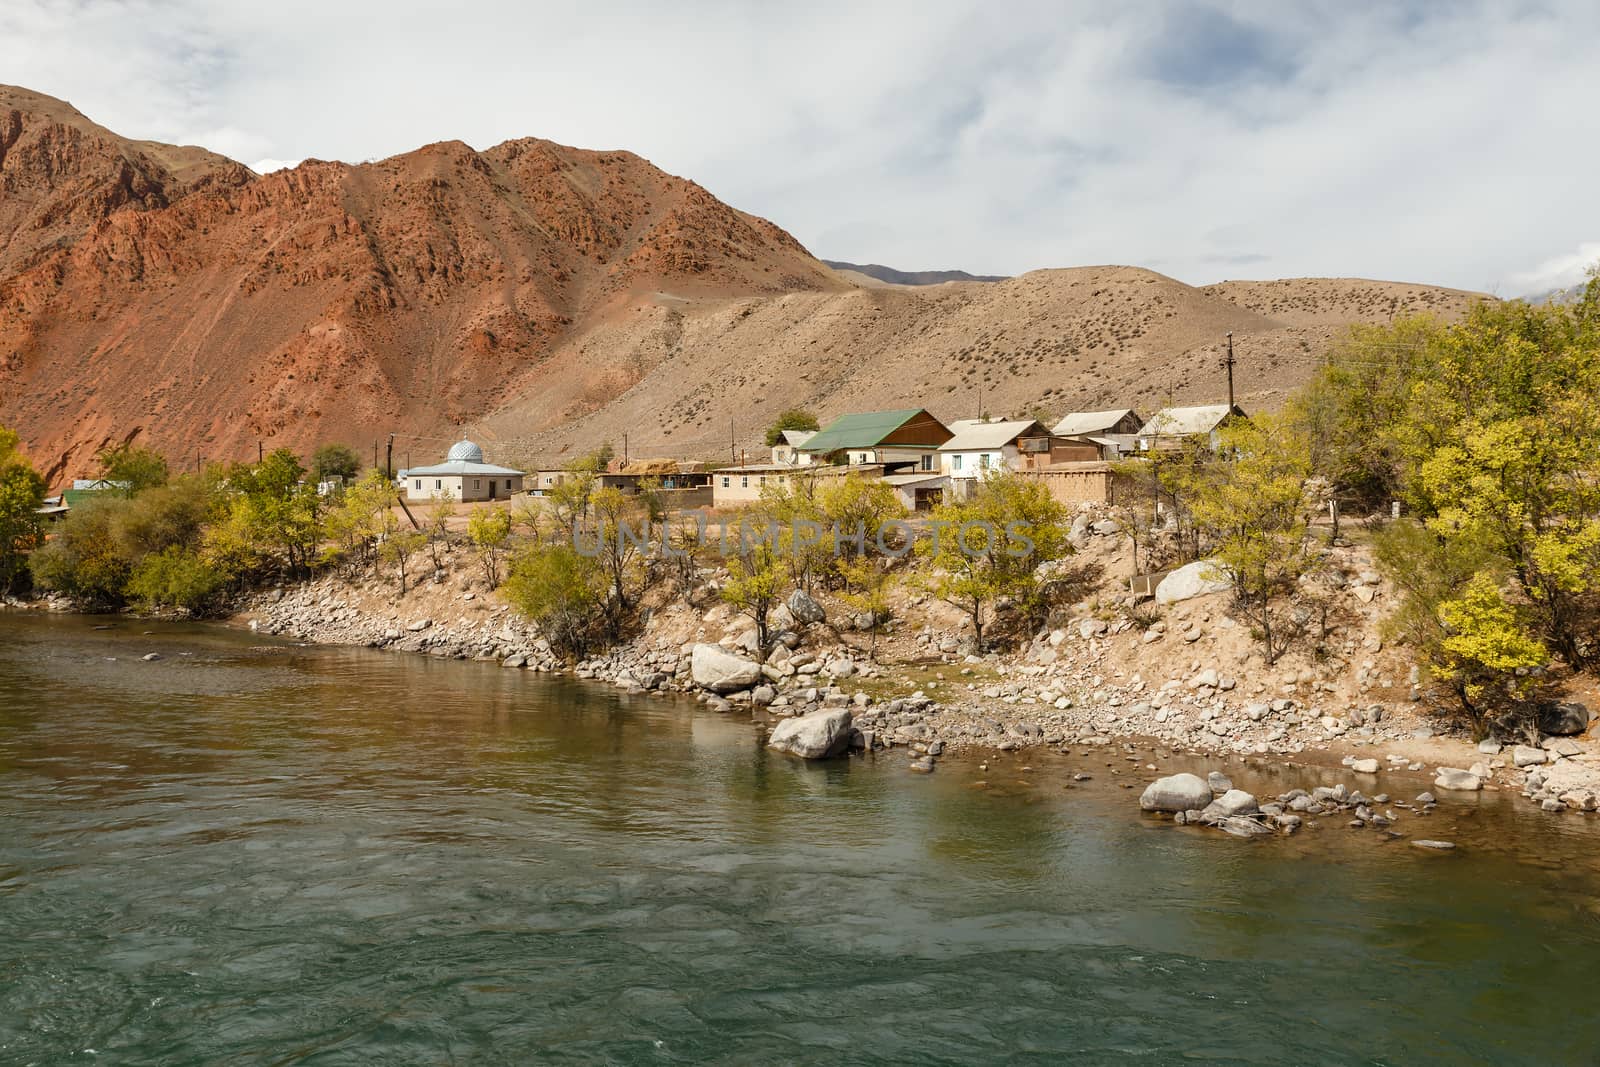 Kokemeren river, houses by the river in the village of Aral, Jumgal district of Naryn region in Kyrgyzstan